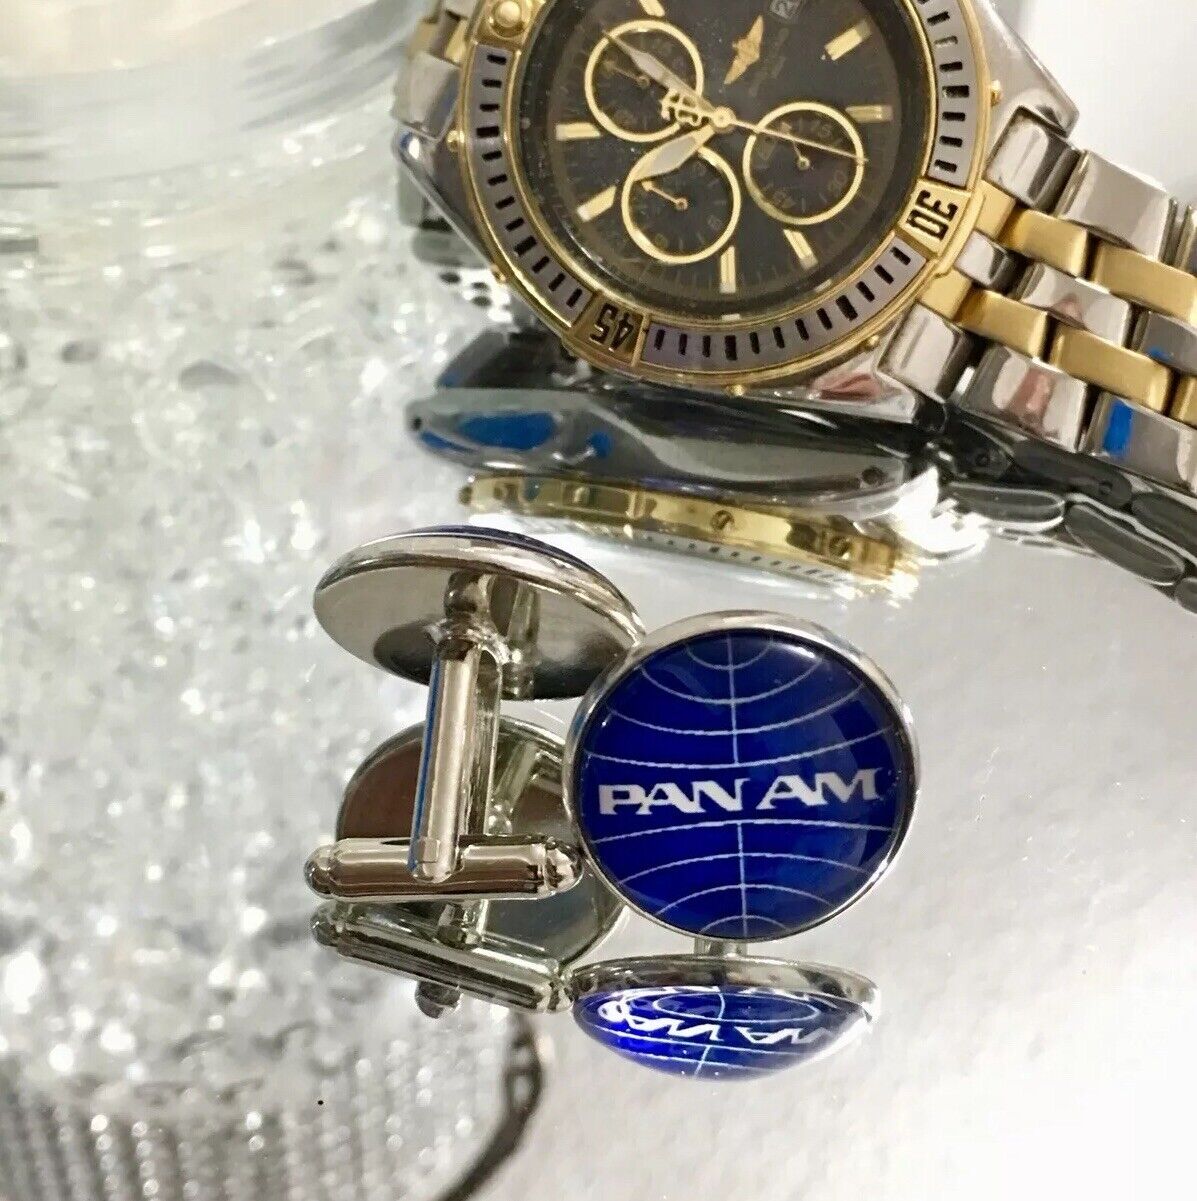 Pan Am Cufflinks 20mm (2 Pack)With Glass Dome Panam American Airlines Airways